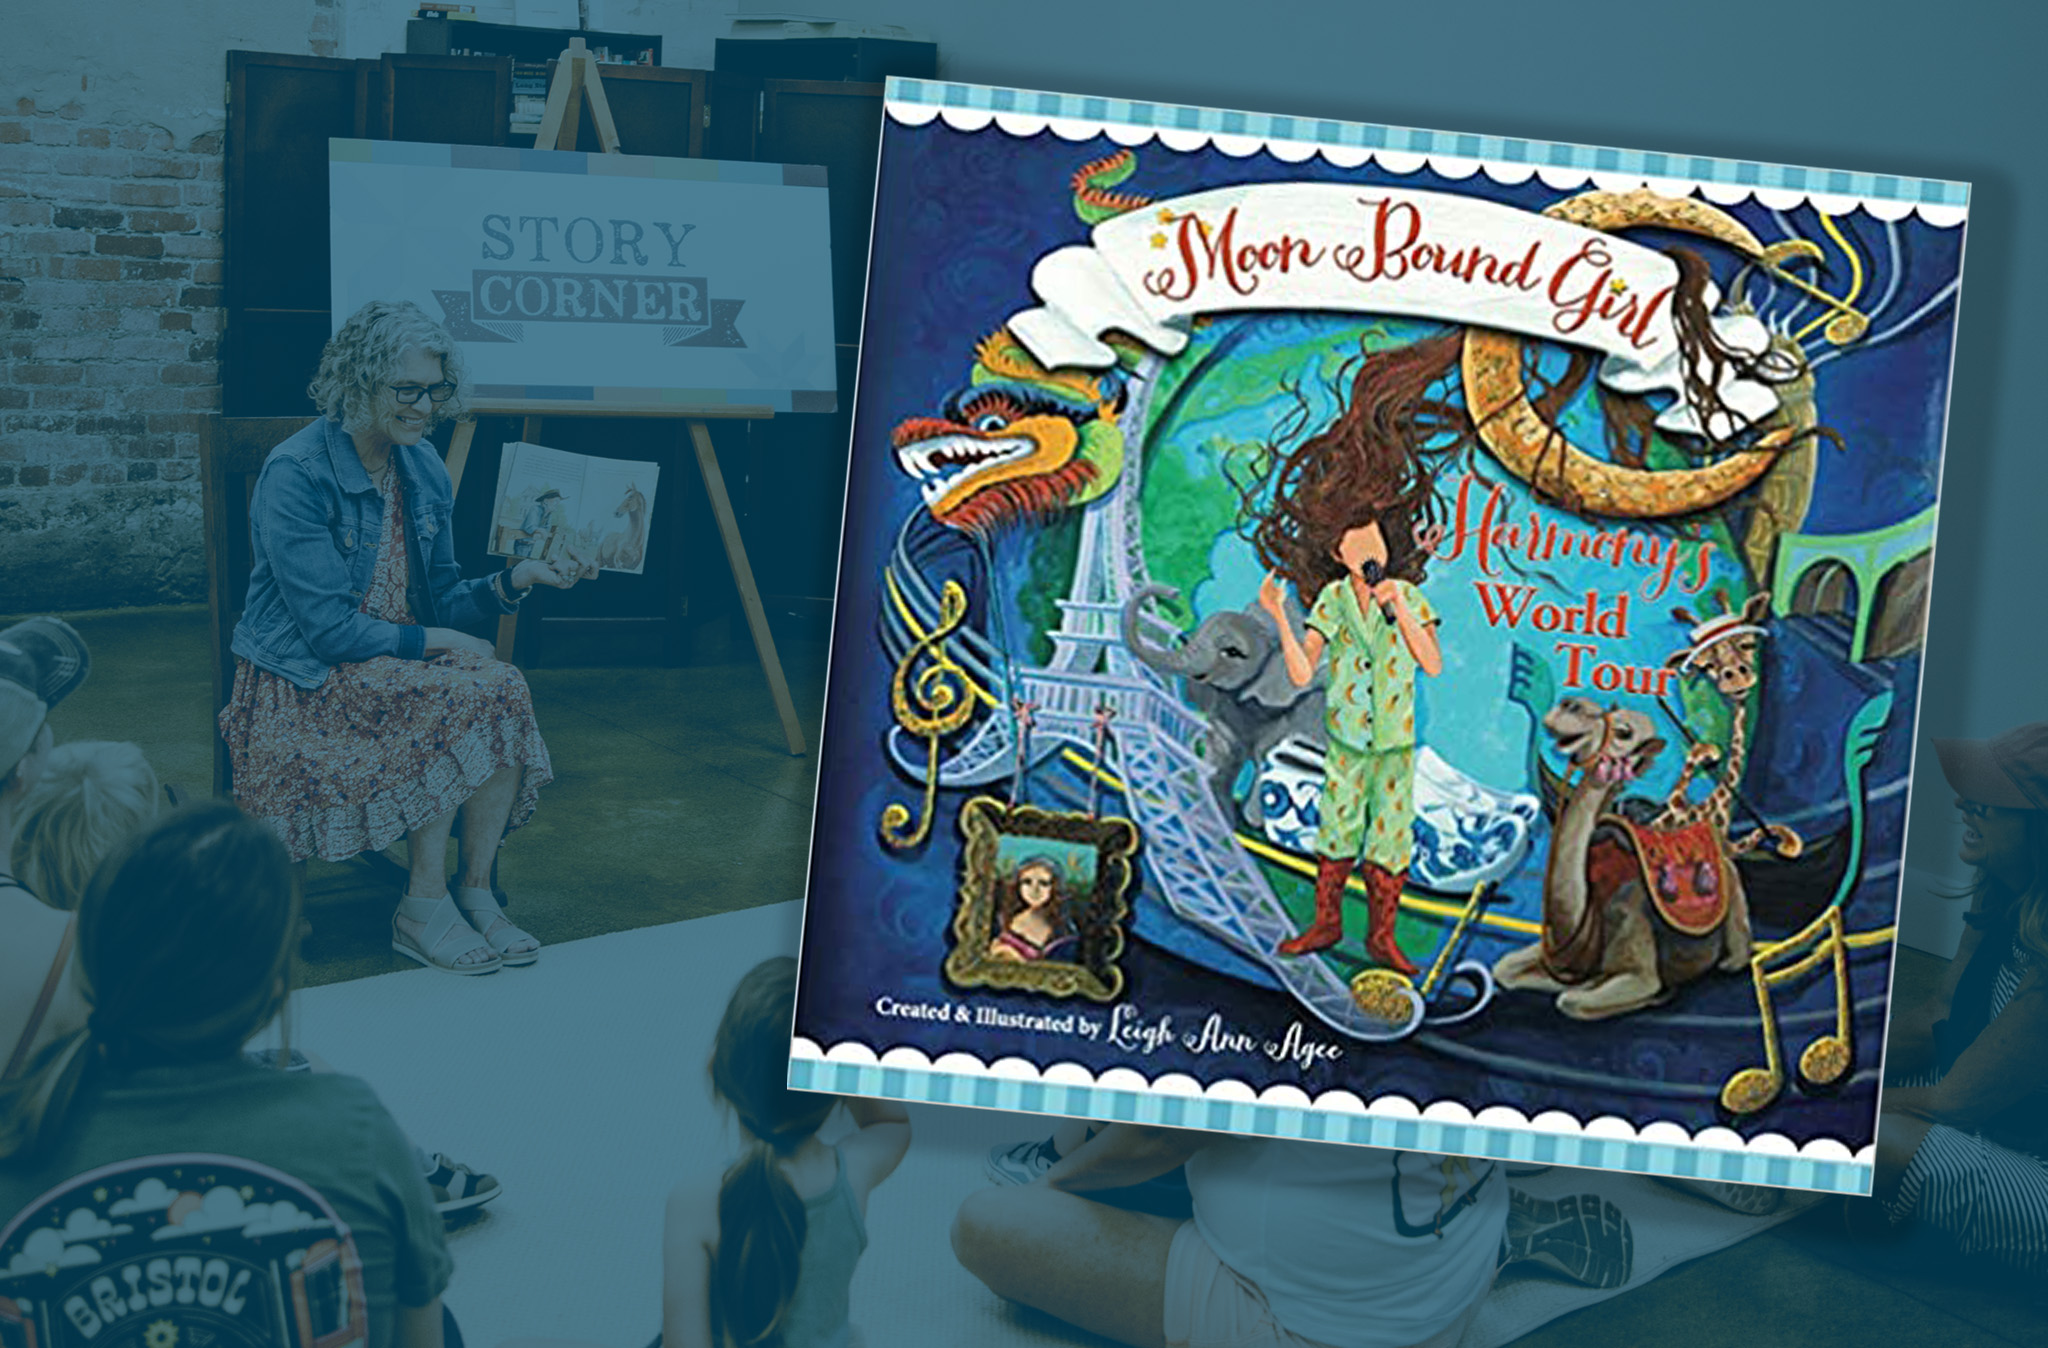 Graphic featuring cover of the book "Moon Bound Girl: Harmony's World Tour."